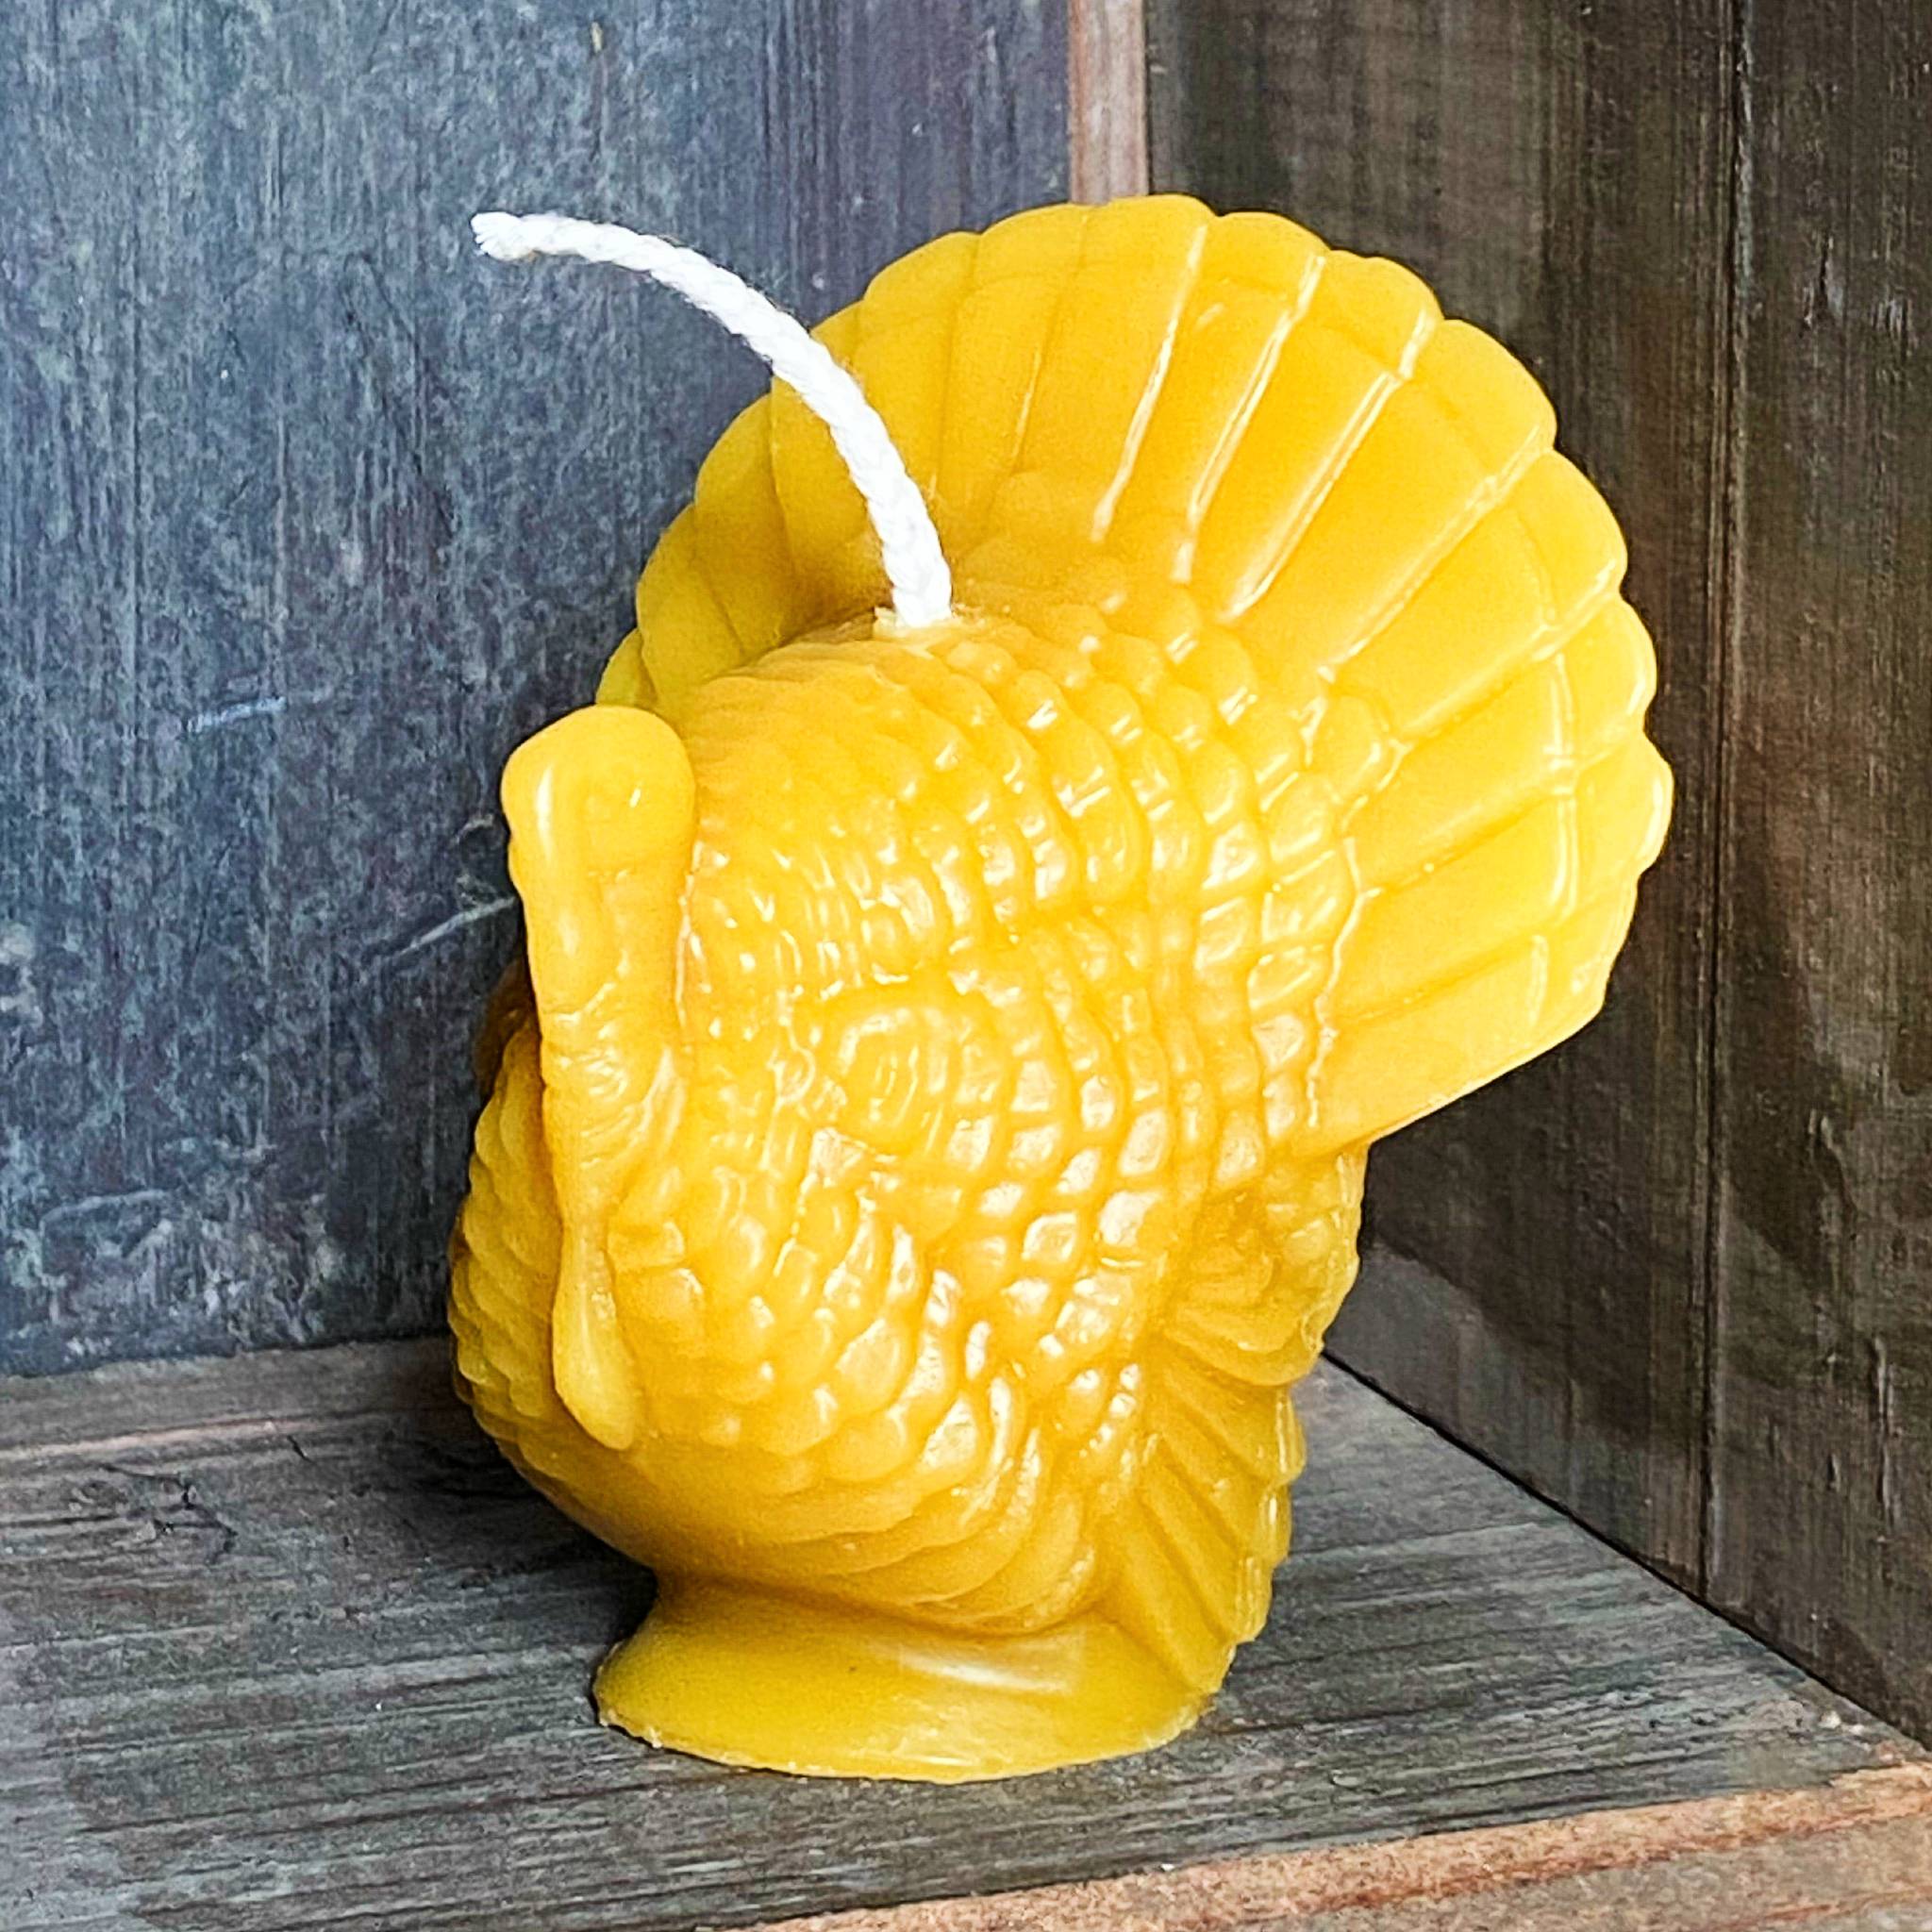 Turkey shaped candle from Mill Creek Apiary